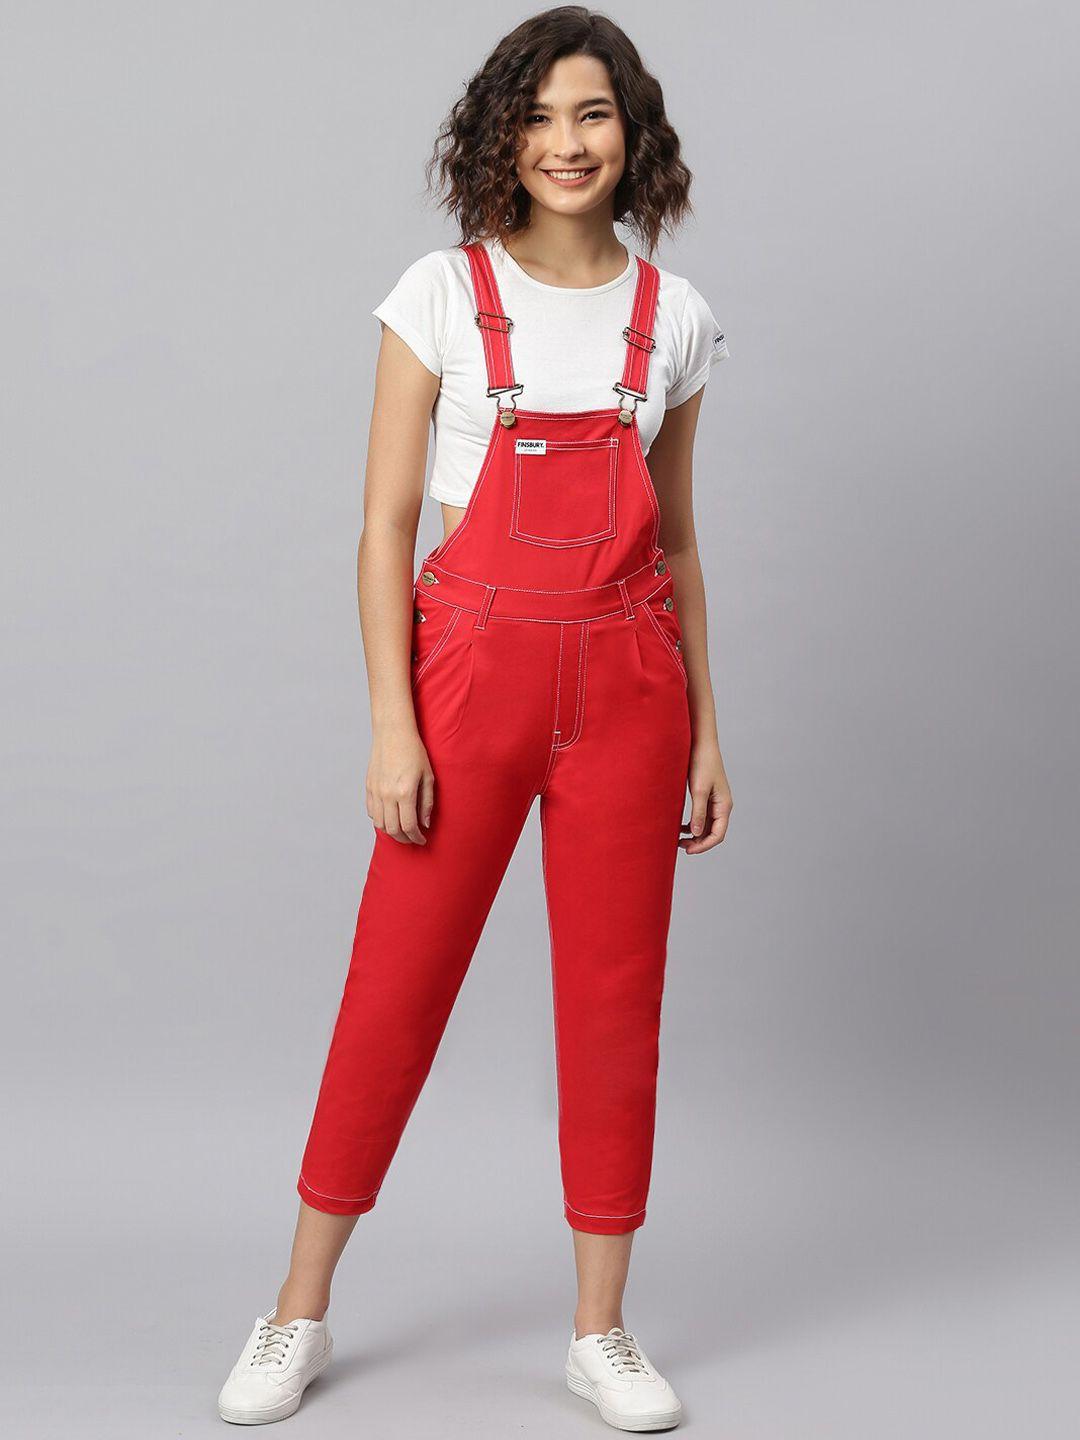 finsbury london women red solid cotton straight leg dungarees